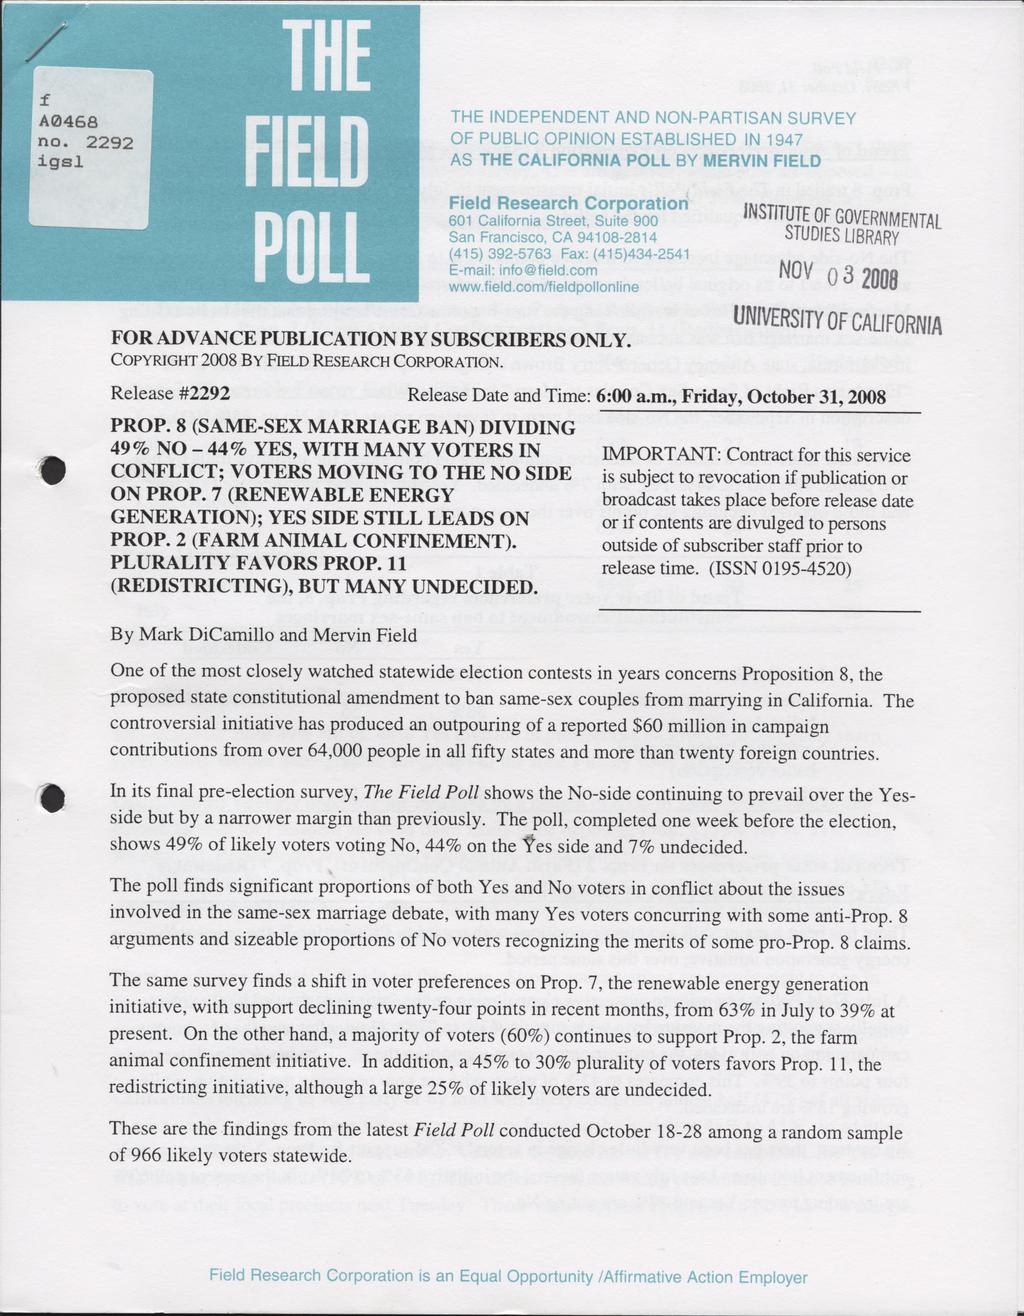 THE INDEPENDENT AND NON-PARTISAN SURVEY OF PUBLIC OPINION ESTABLISHED IN 1947 AS THE CALIFORNIA POLL BY MERVIN FIELD Field Research Corporation 601 California Street, Suite 900 San Francisco, CA